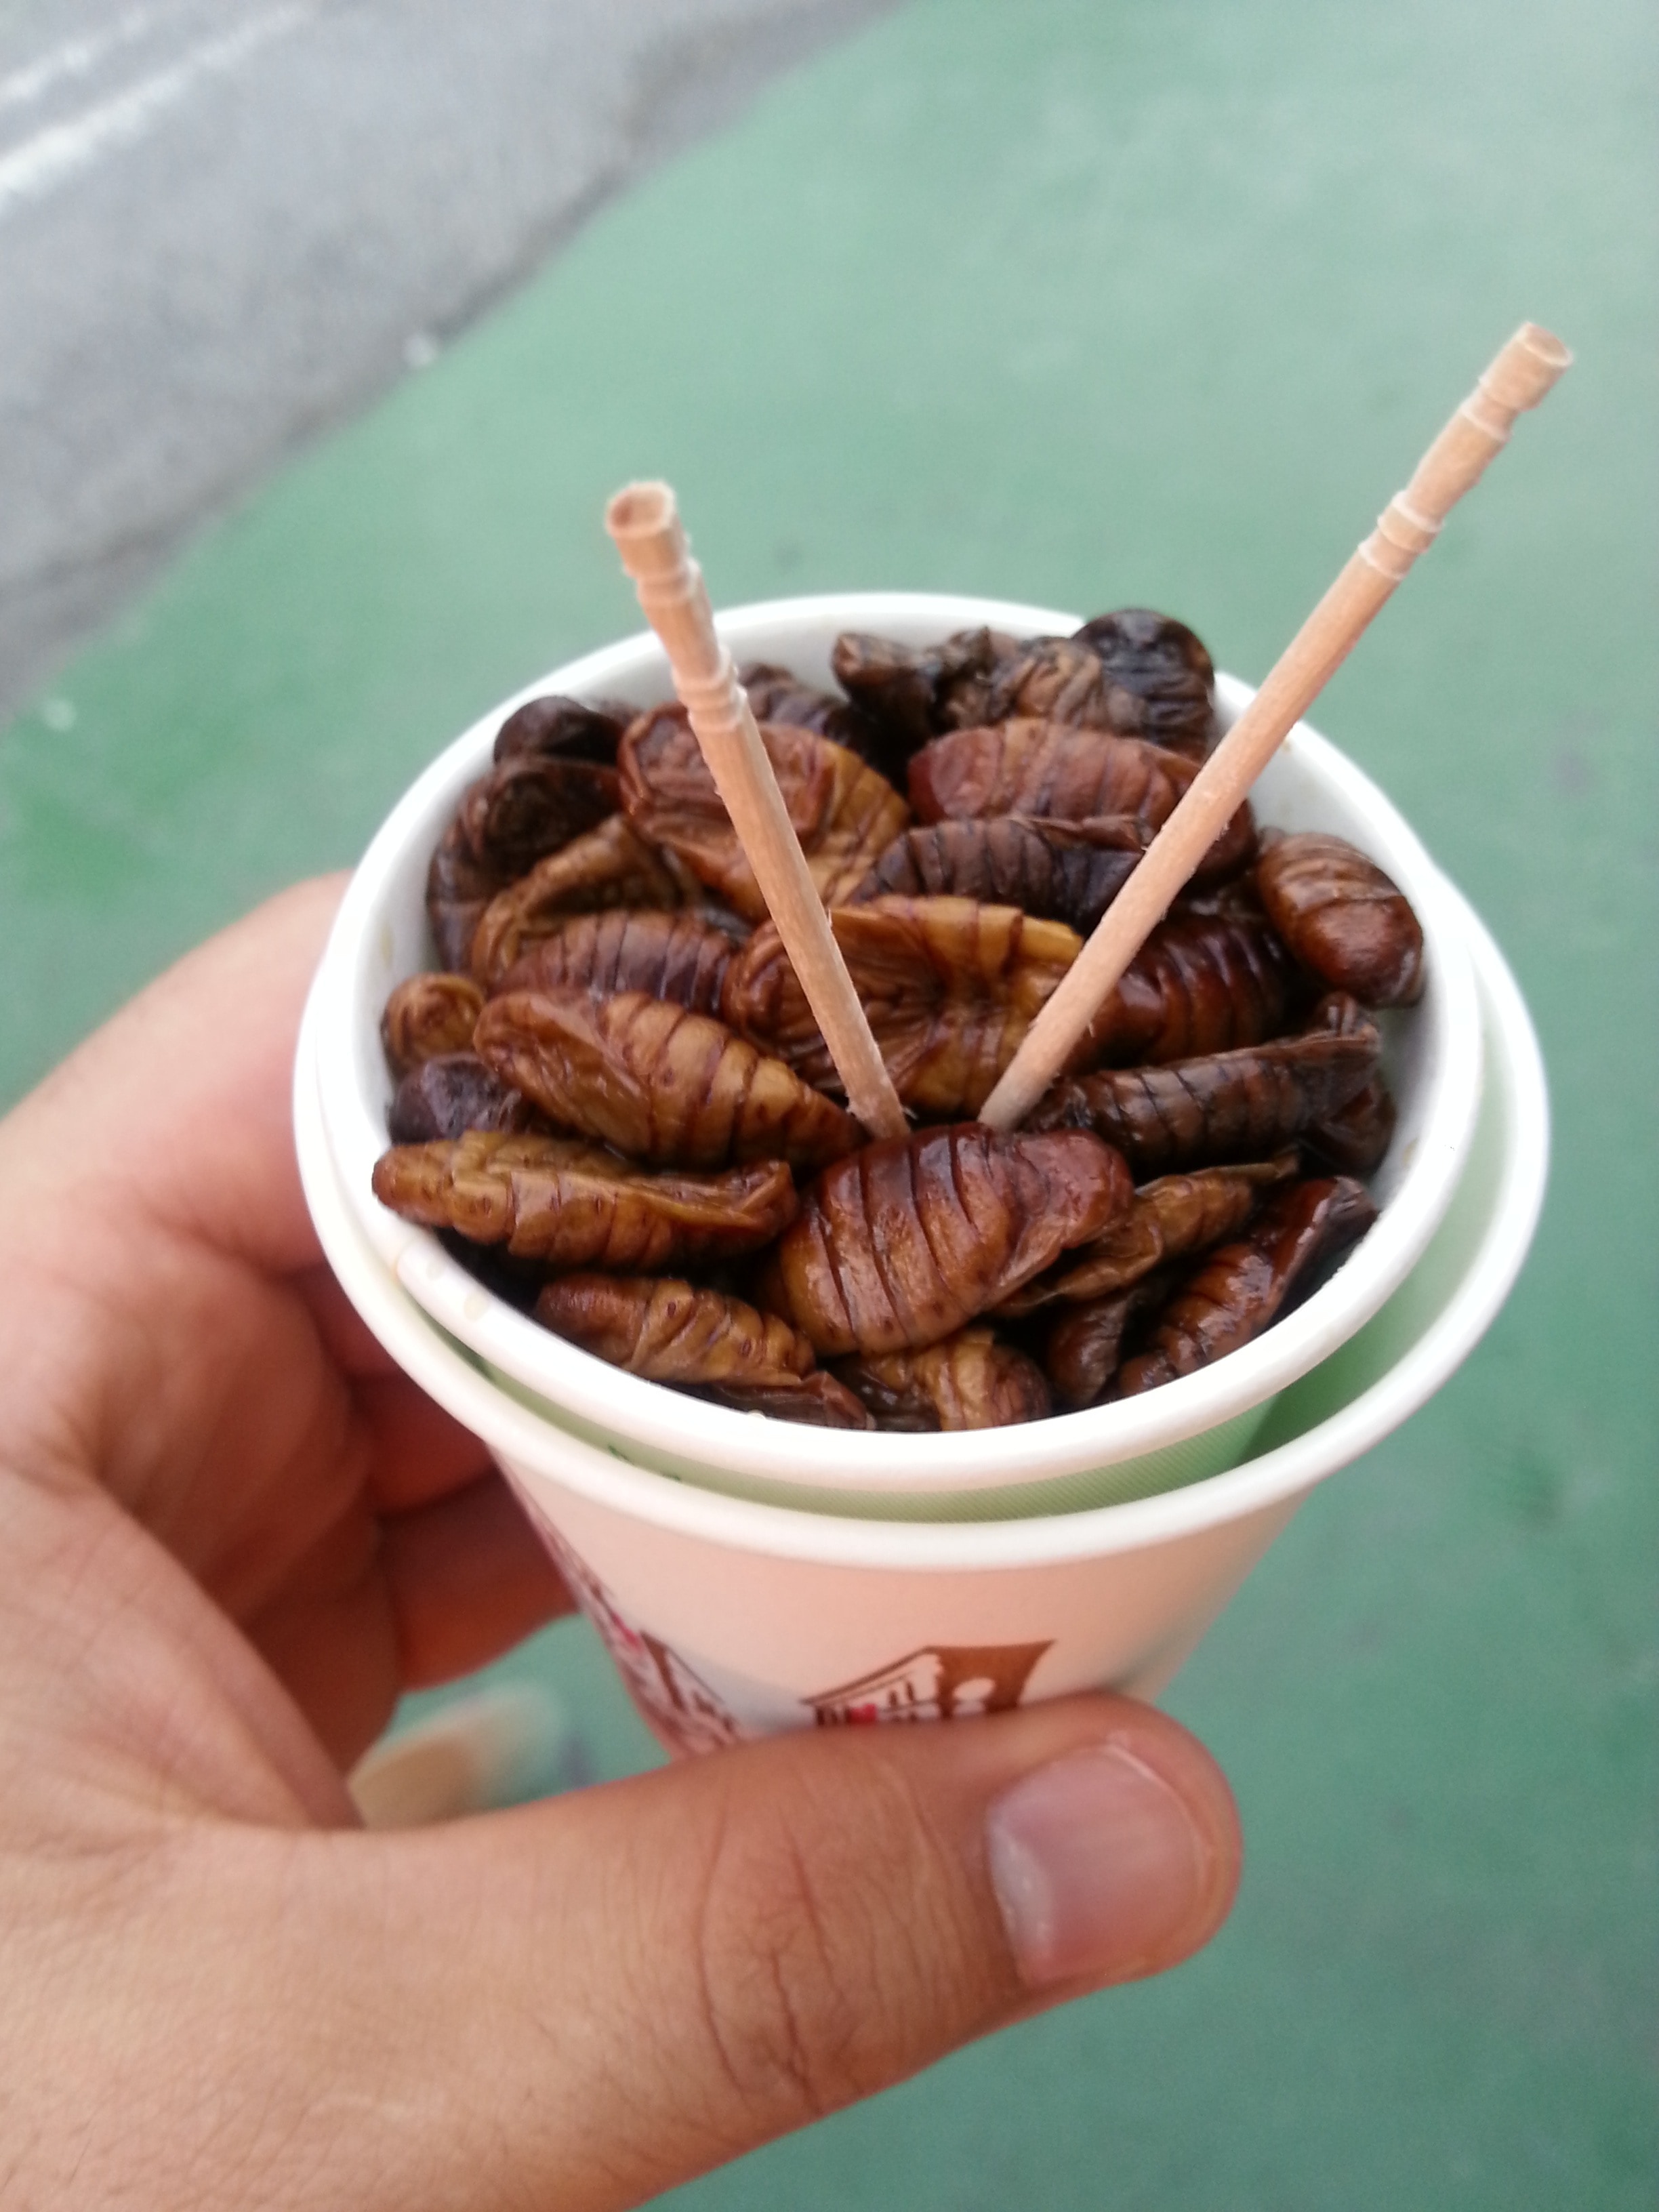 two toothpicks on brown food in white plastic cup